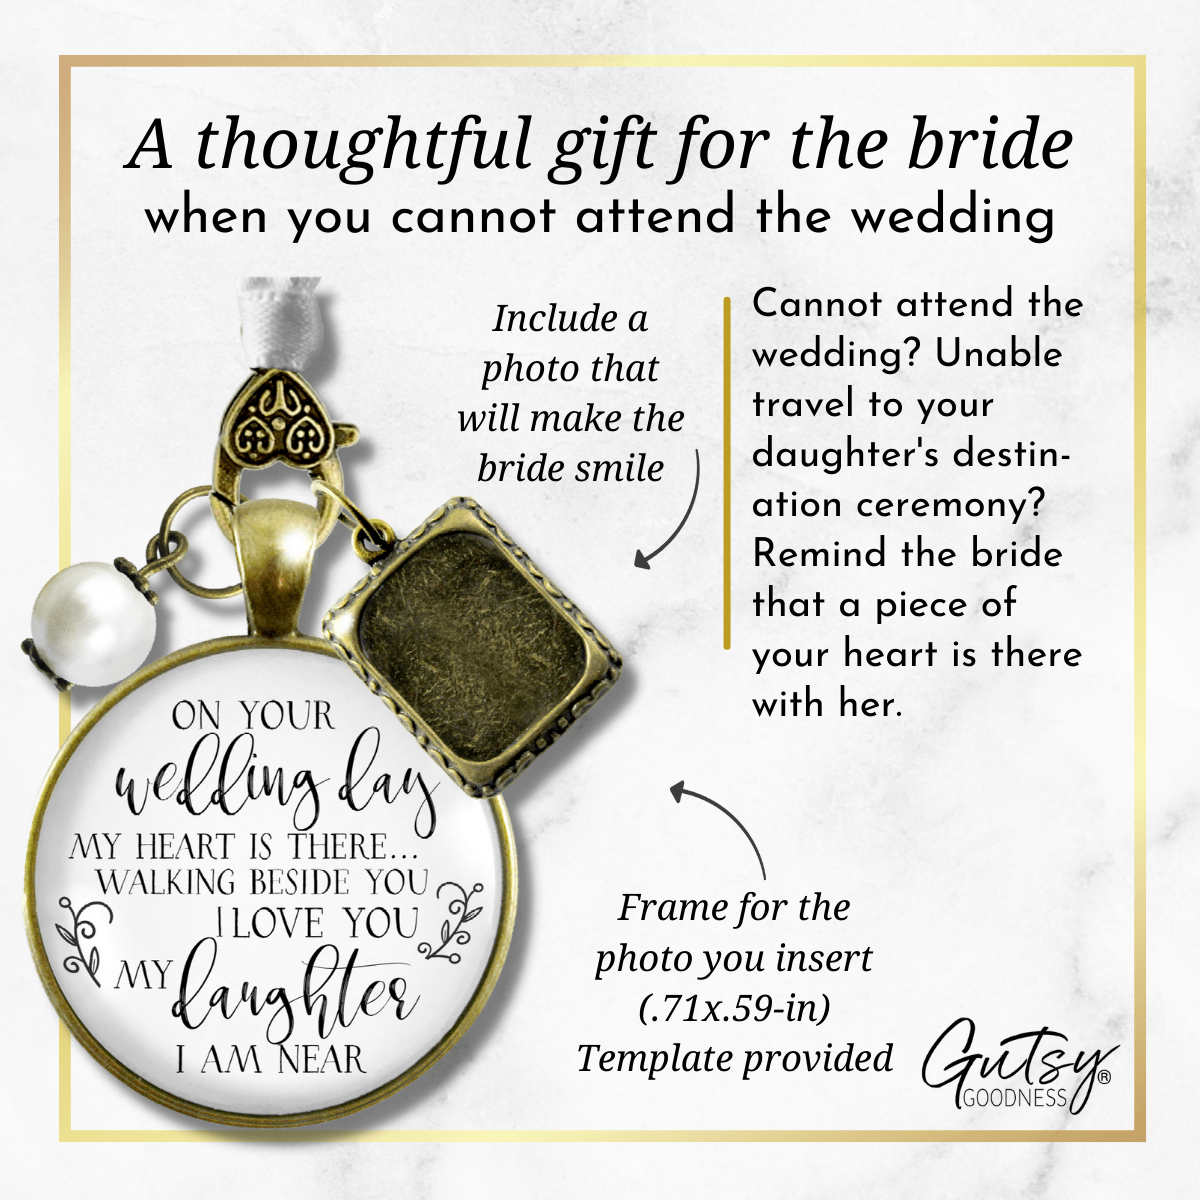 On Your Wedding Day MY Heart Is There Walking Beside You DAUGHTER - DESTINATION BRONZE - WHITE - WHITE BEAD